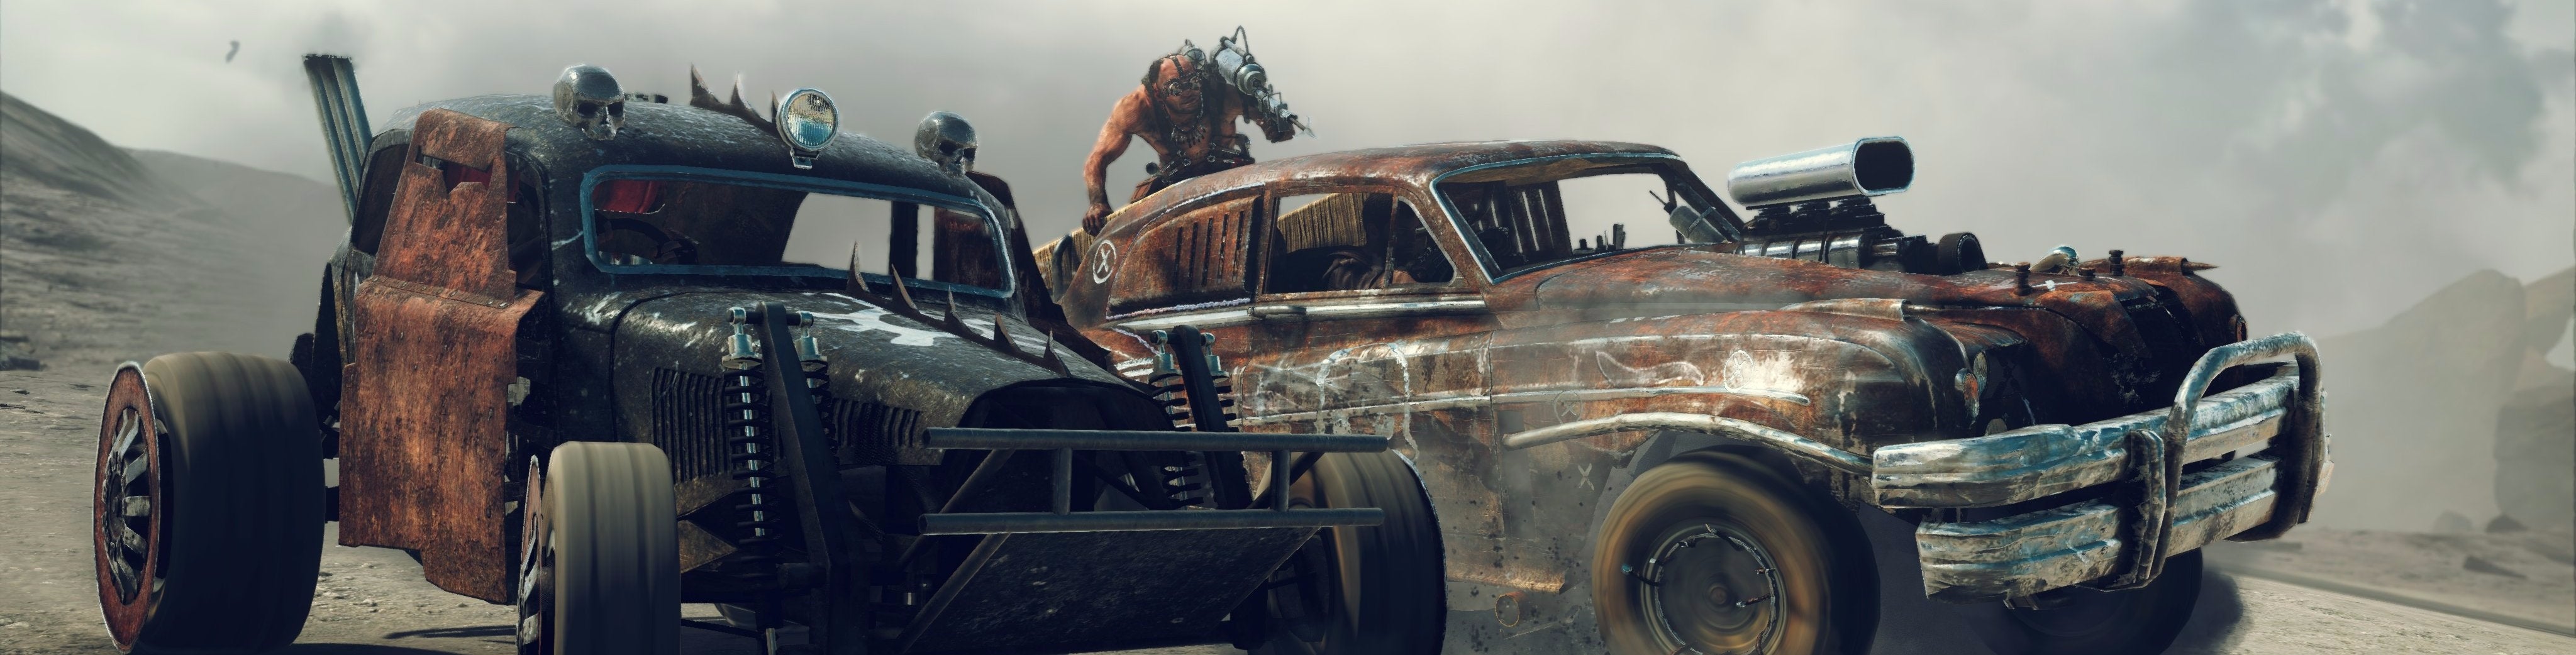 Image for The Mad Max game takes a different path to Fury Road